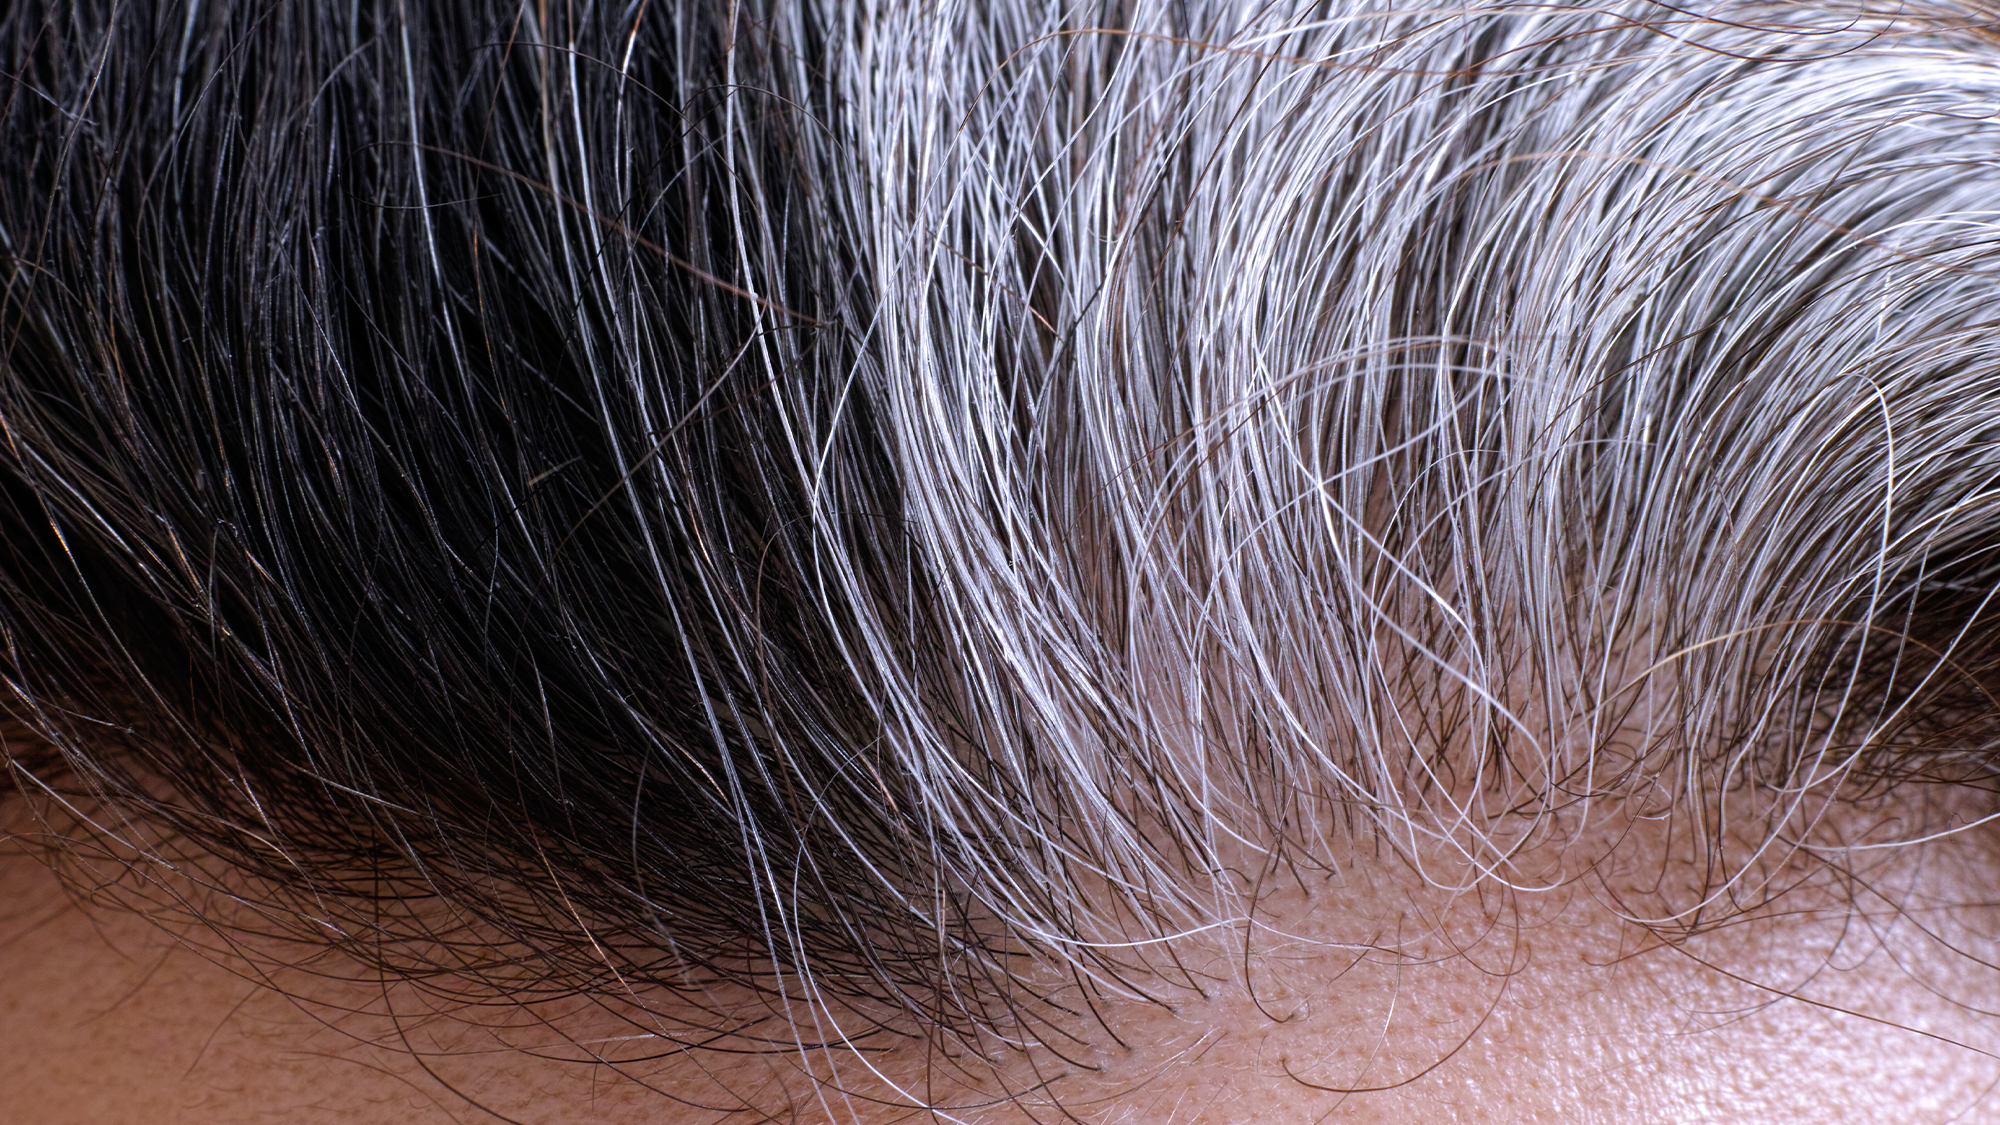 Gray hair growing on a male's head.